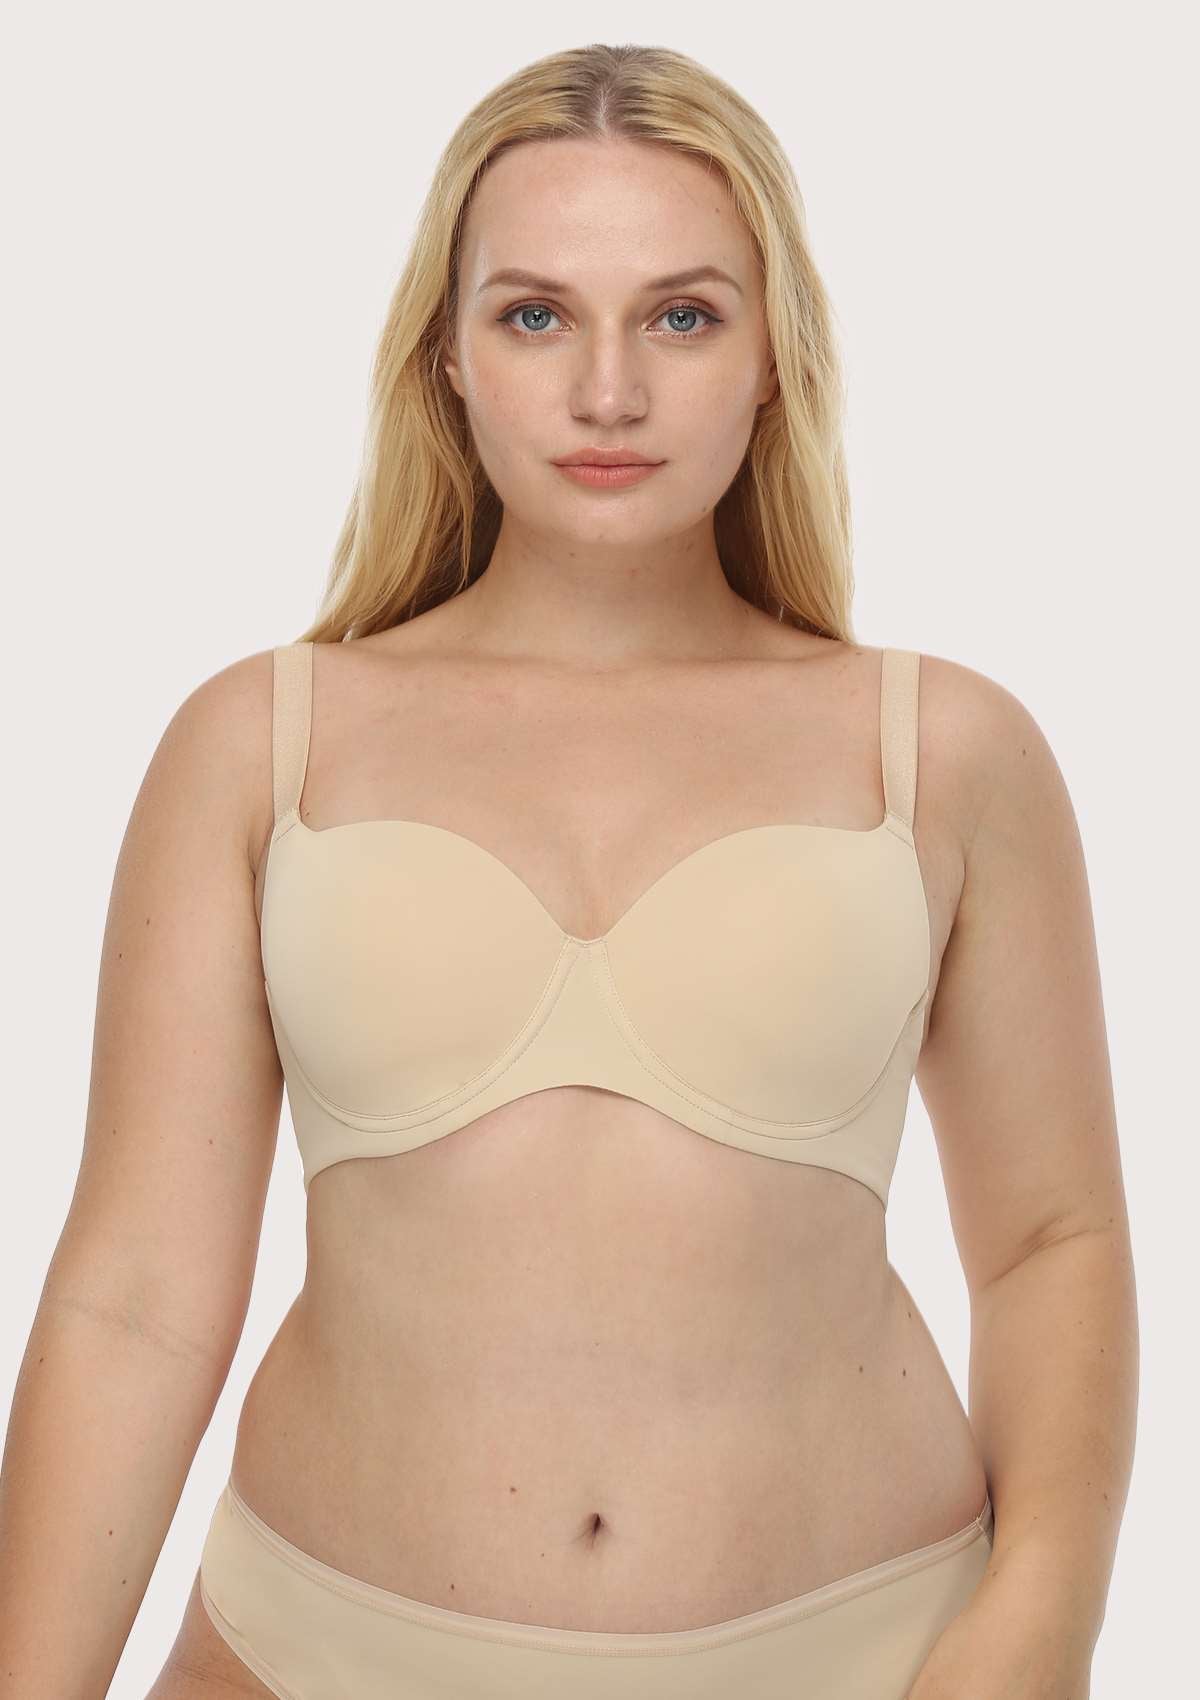 HSIA Gemma Smooth Padded T-shirt Everyday Bras - For Lift And Comfort - Beige / 46 / DDD/F